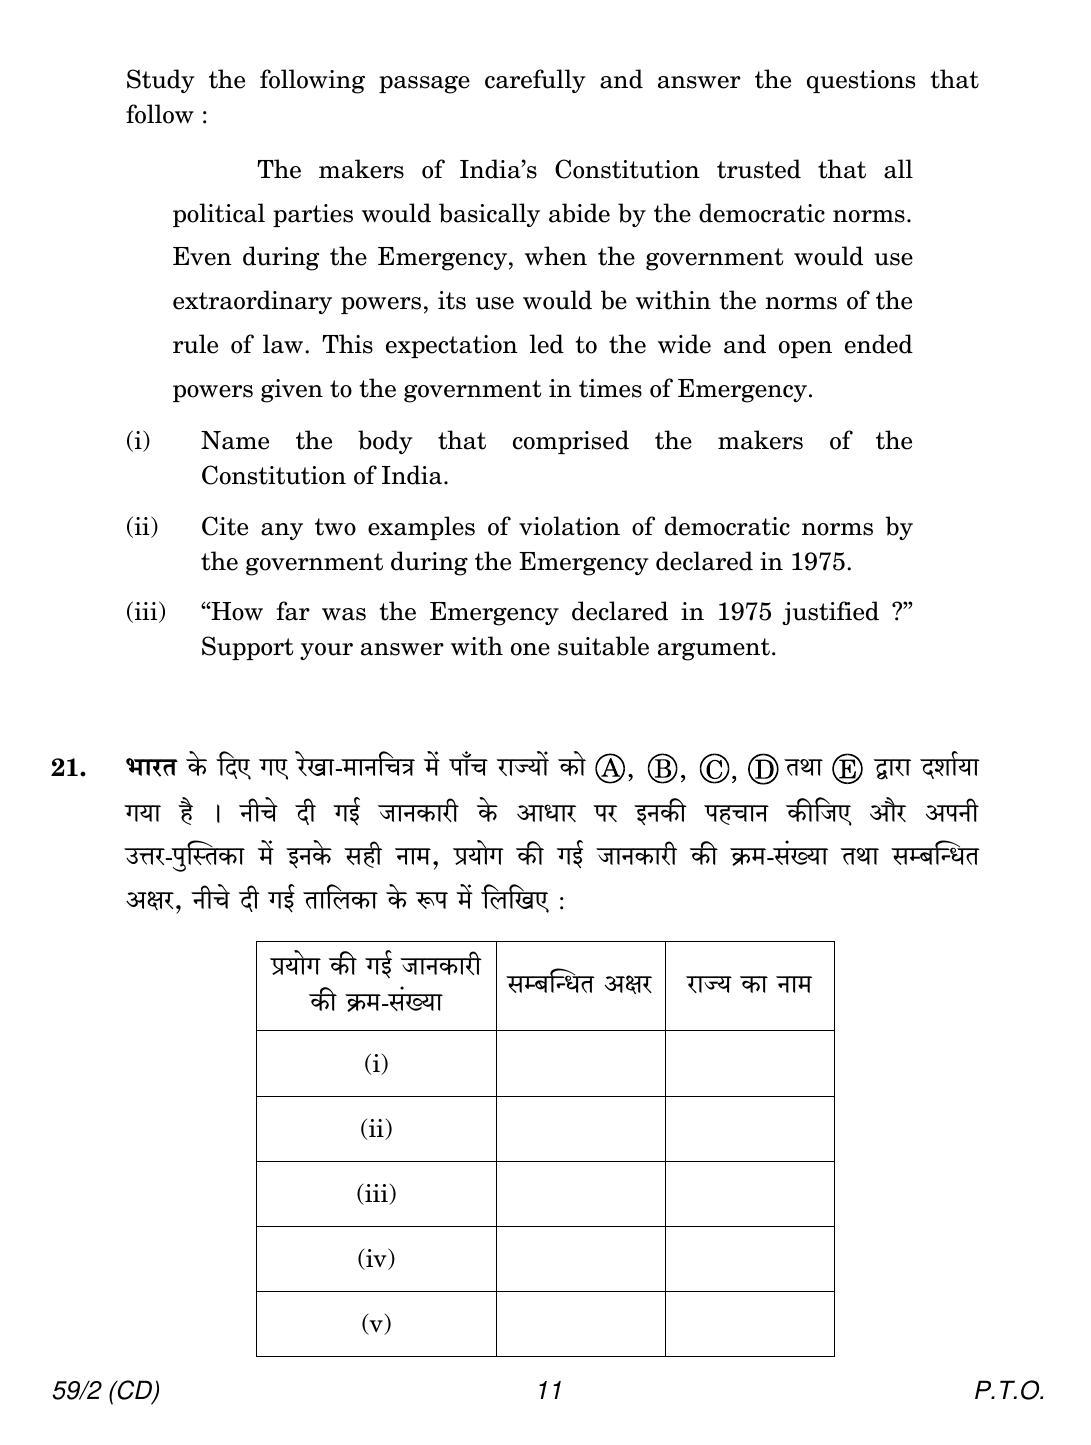 CBSE Class 12 59-2 POLITICAL SCIENCE CD 2018 Question Paper - Page 11